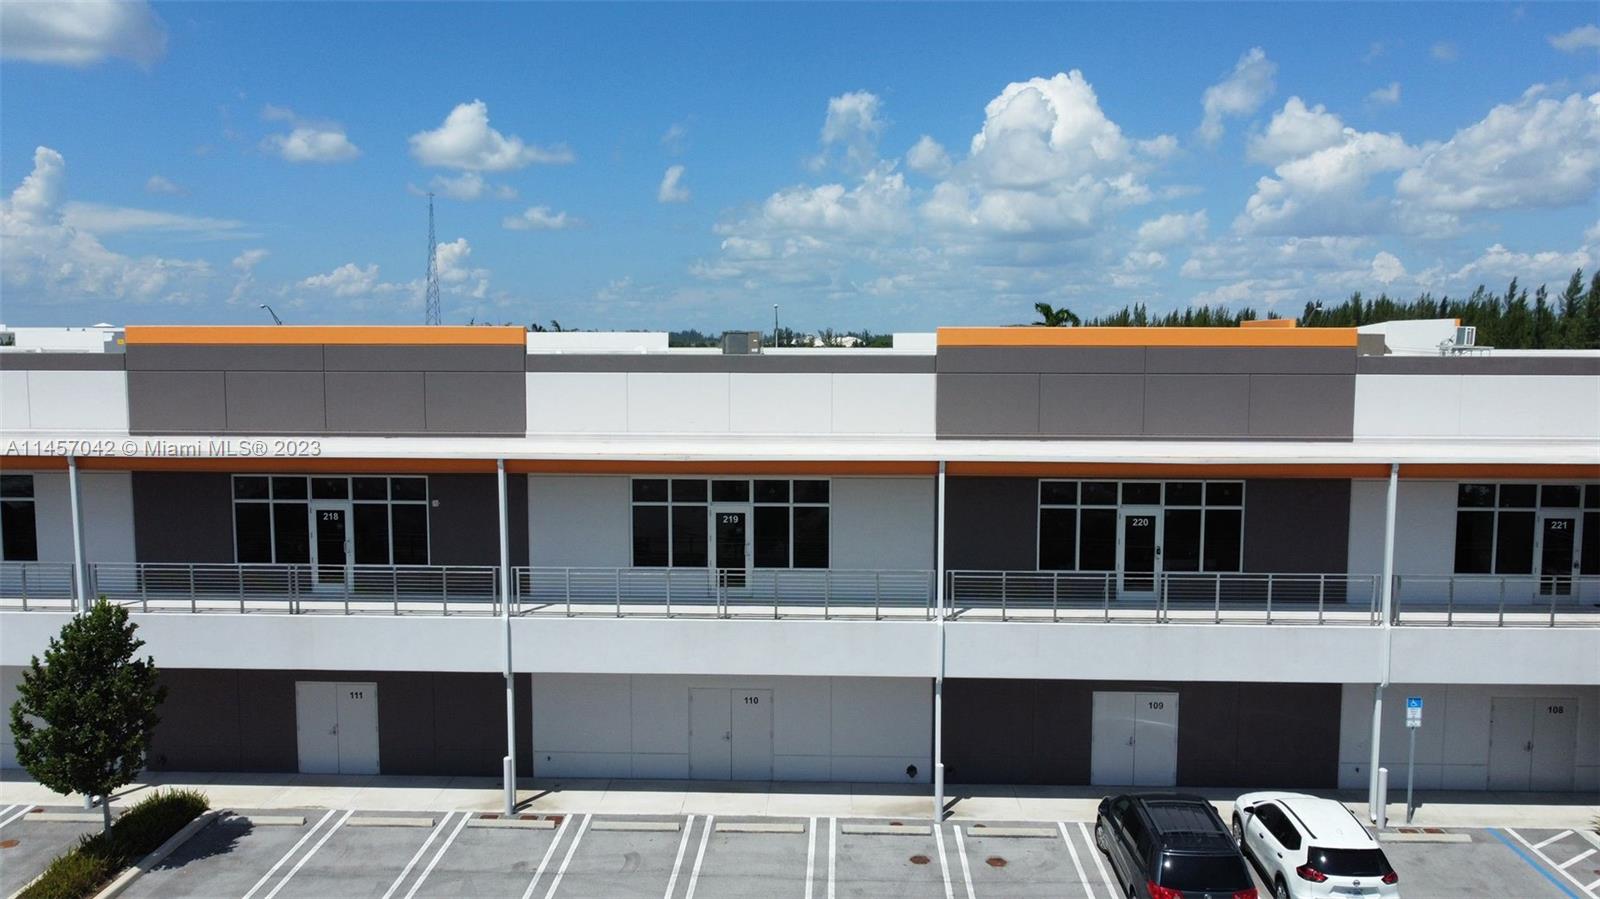 Office/Condo/Retail Space built in 2020 available with Spectacular Views Centrally located along Doral, 836, NW 12 Street, FL Turnpike and minutes from Dolphin Mall...1107 sqft being offered in an open Floorplan concept with LVP Flooring, Suspended Acoustical Drop Ceiling with Lighting, Finished Bathroom, Mop Sink and water fountain is also included...Unit is a Second Floor space with Retail Window Frontage...Plenty of Common Area Parking...Being offered at $25/sqft plus CAM (apprx $9.20 sqft) to a well-qualified Tenant preferably for a three to five year lease...Renewal Options will be considered based on Tenant qualifications...Additional Buildout may also be considered and reviewed by Landlord/Owner.